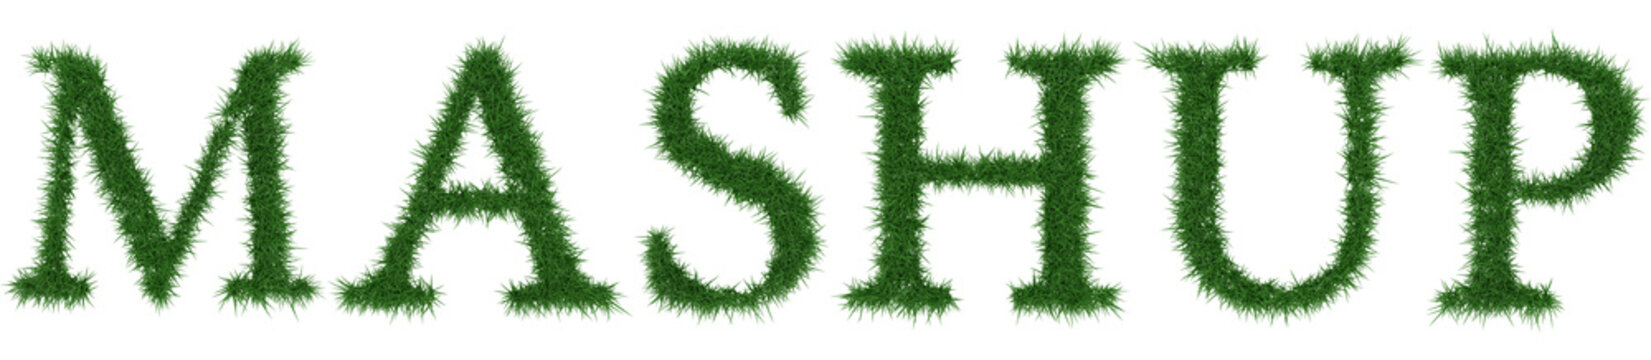 Mashup - 3D rendering fresh Grass letters isolated on whhite background.